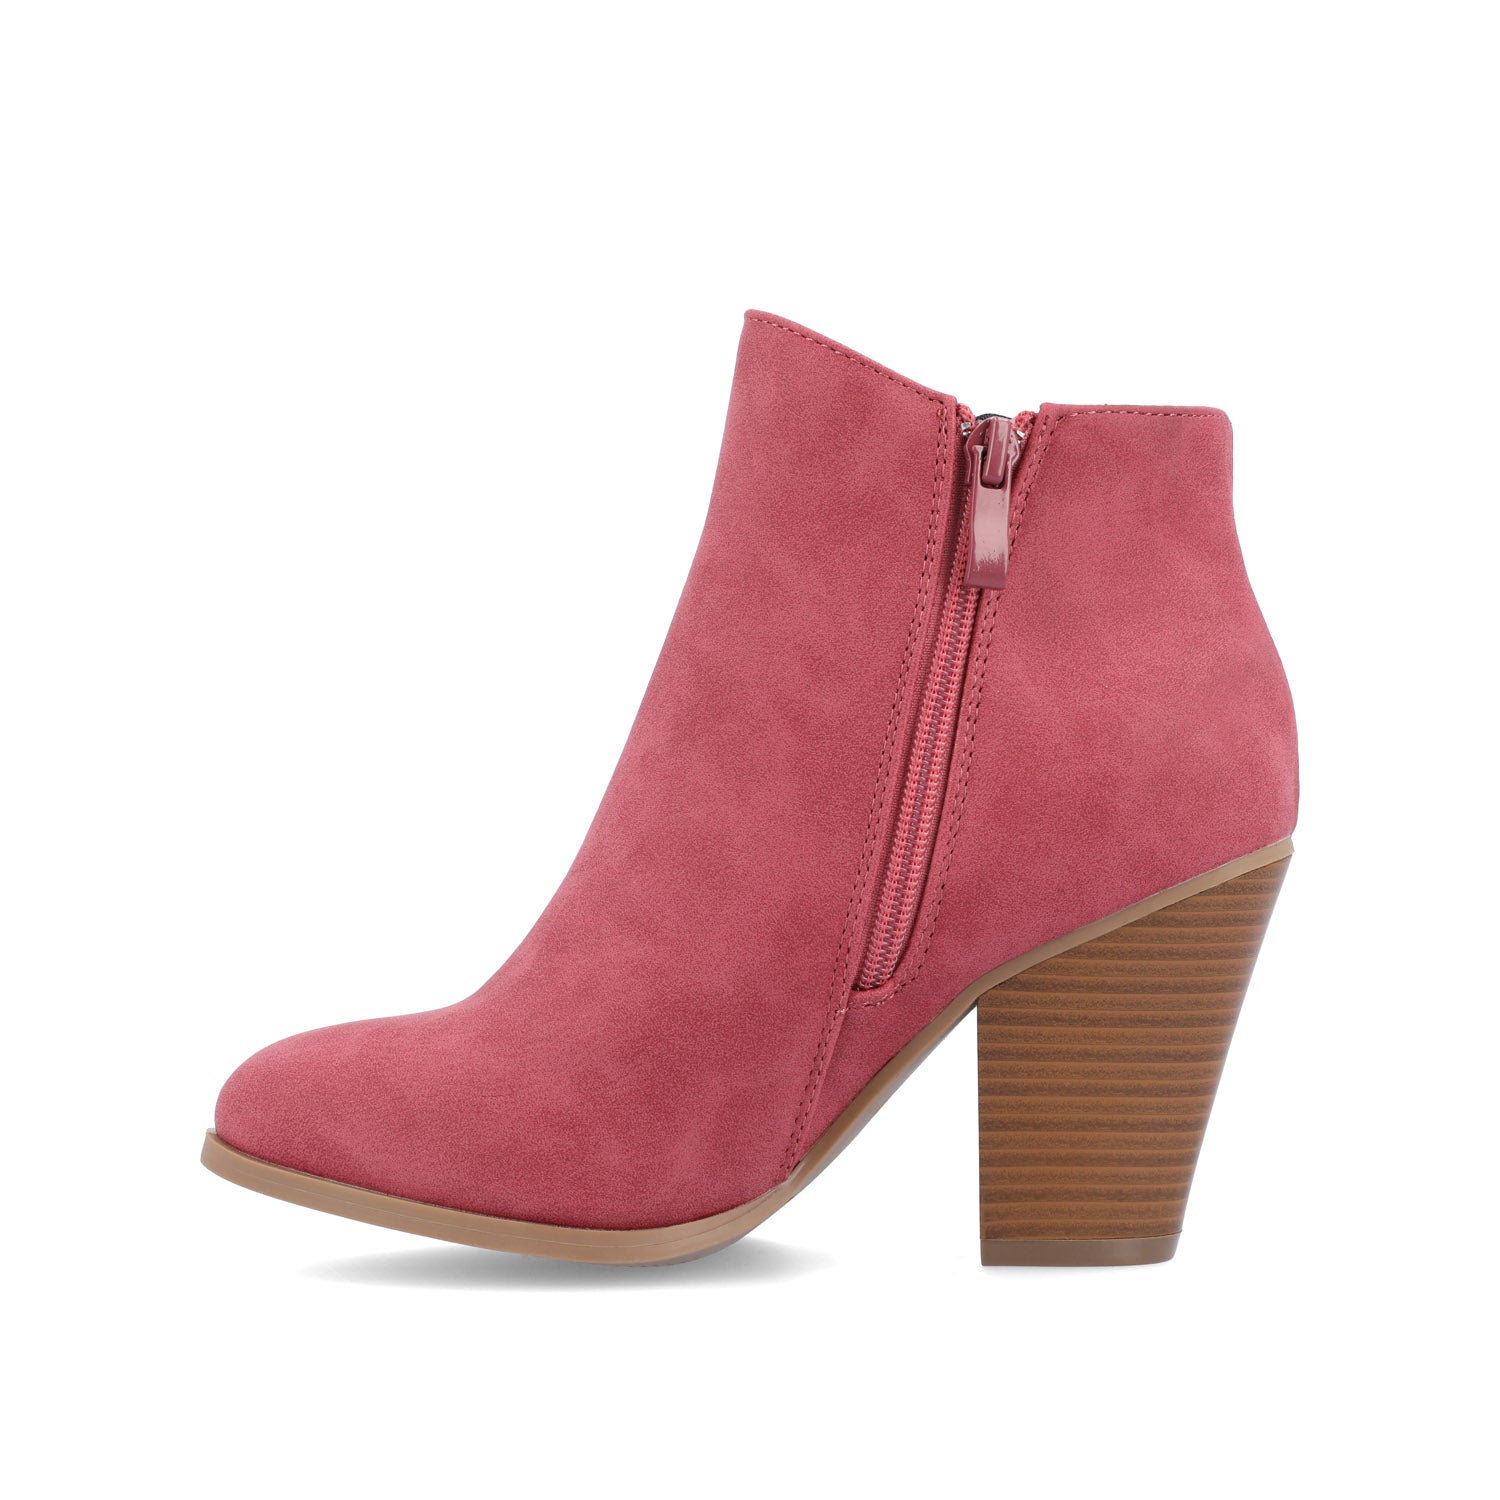 VALLY ZIP-UP BOOTIES IN FAUX LEATHER